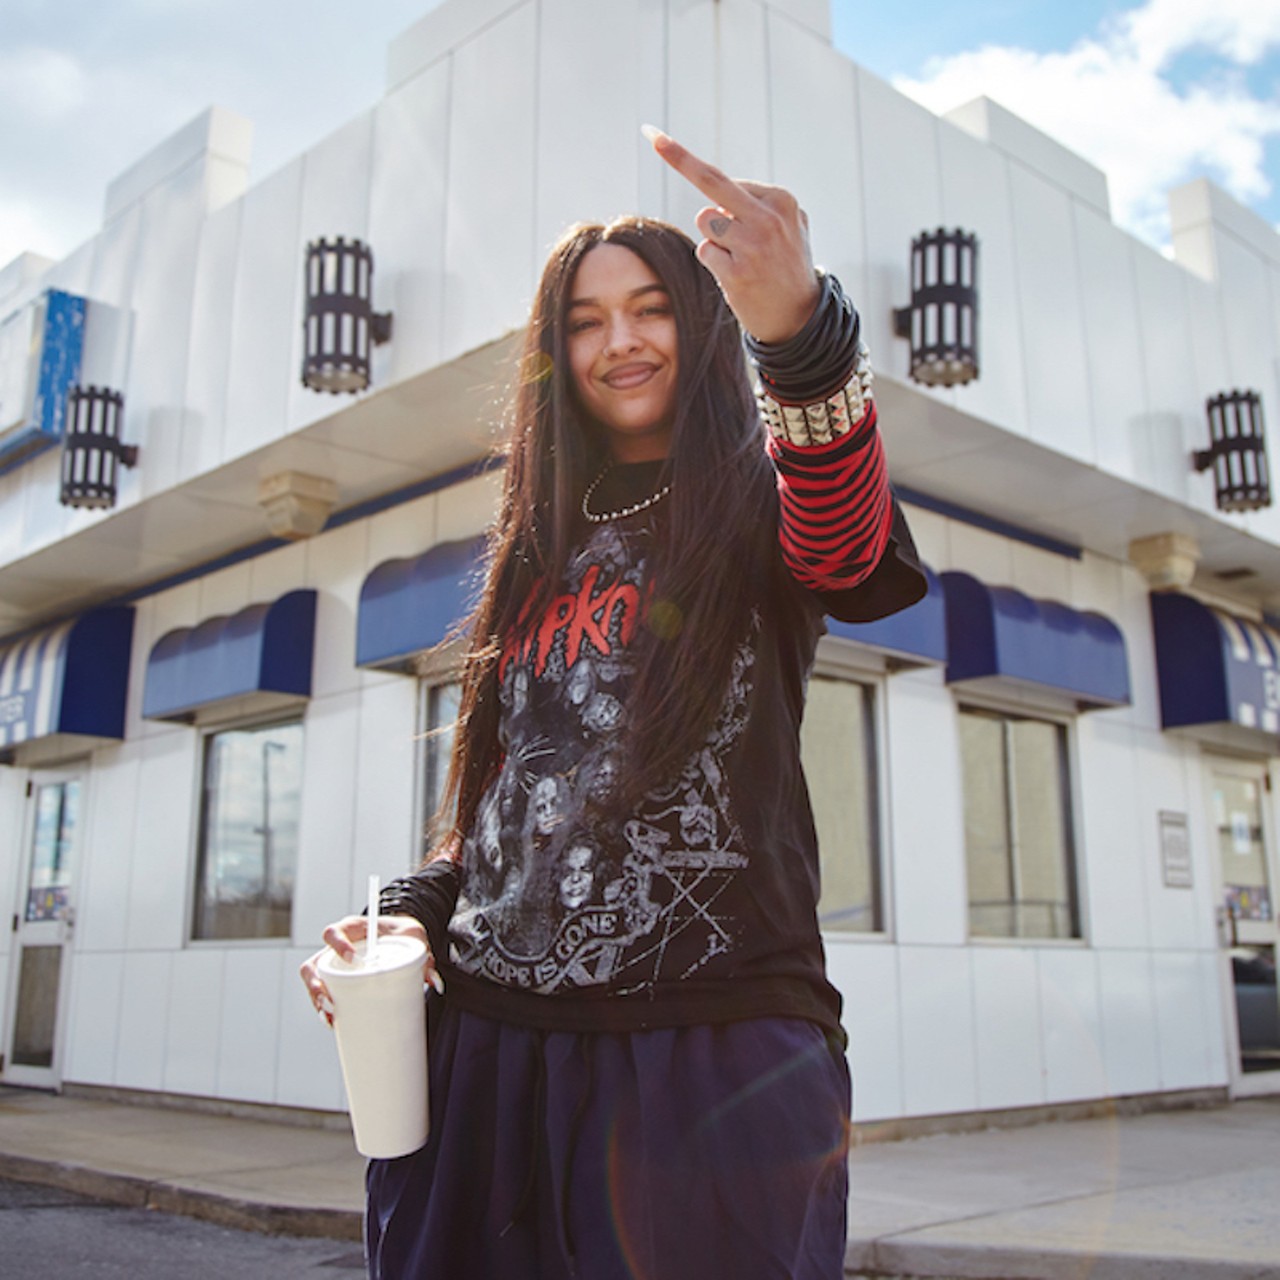 Princess Nokia &#151; &#147;Tomboy&#148;
This party song by the NYC rapper is the one to have on when you&#146;re on you&#146;re &#147;finna sit back and just sip on Bacardi.&#148;
Photo via Grandstand HQ